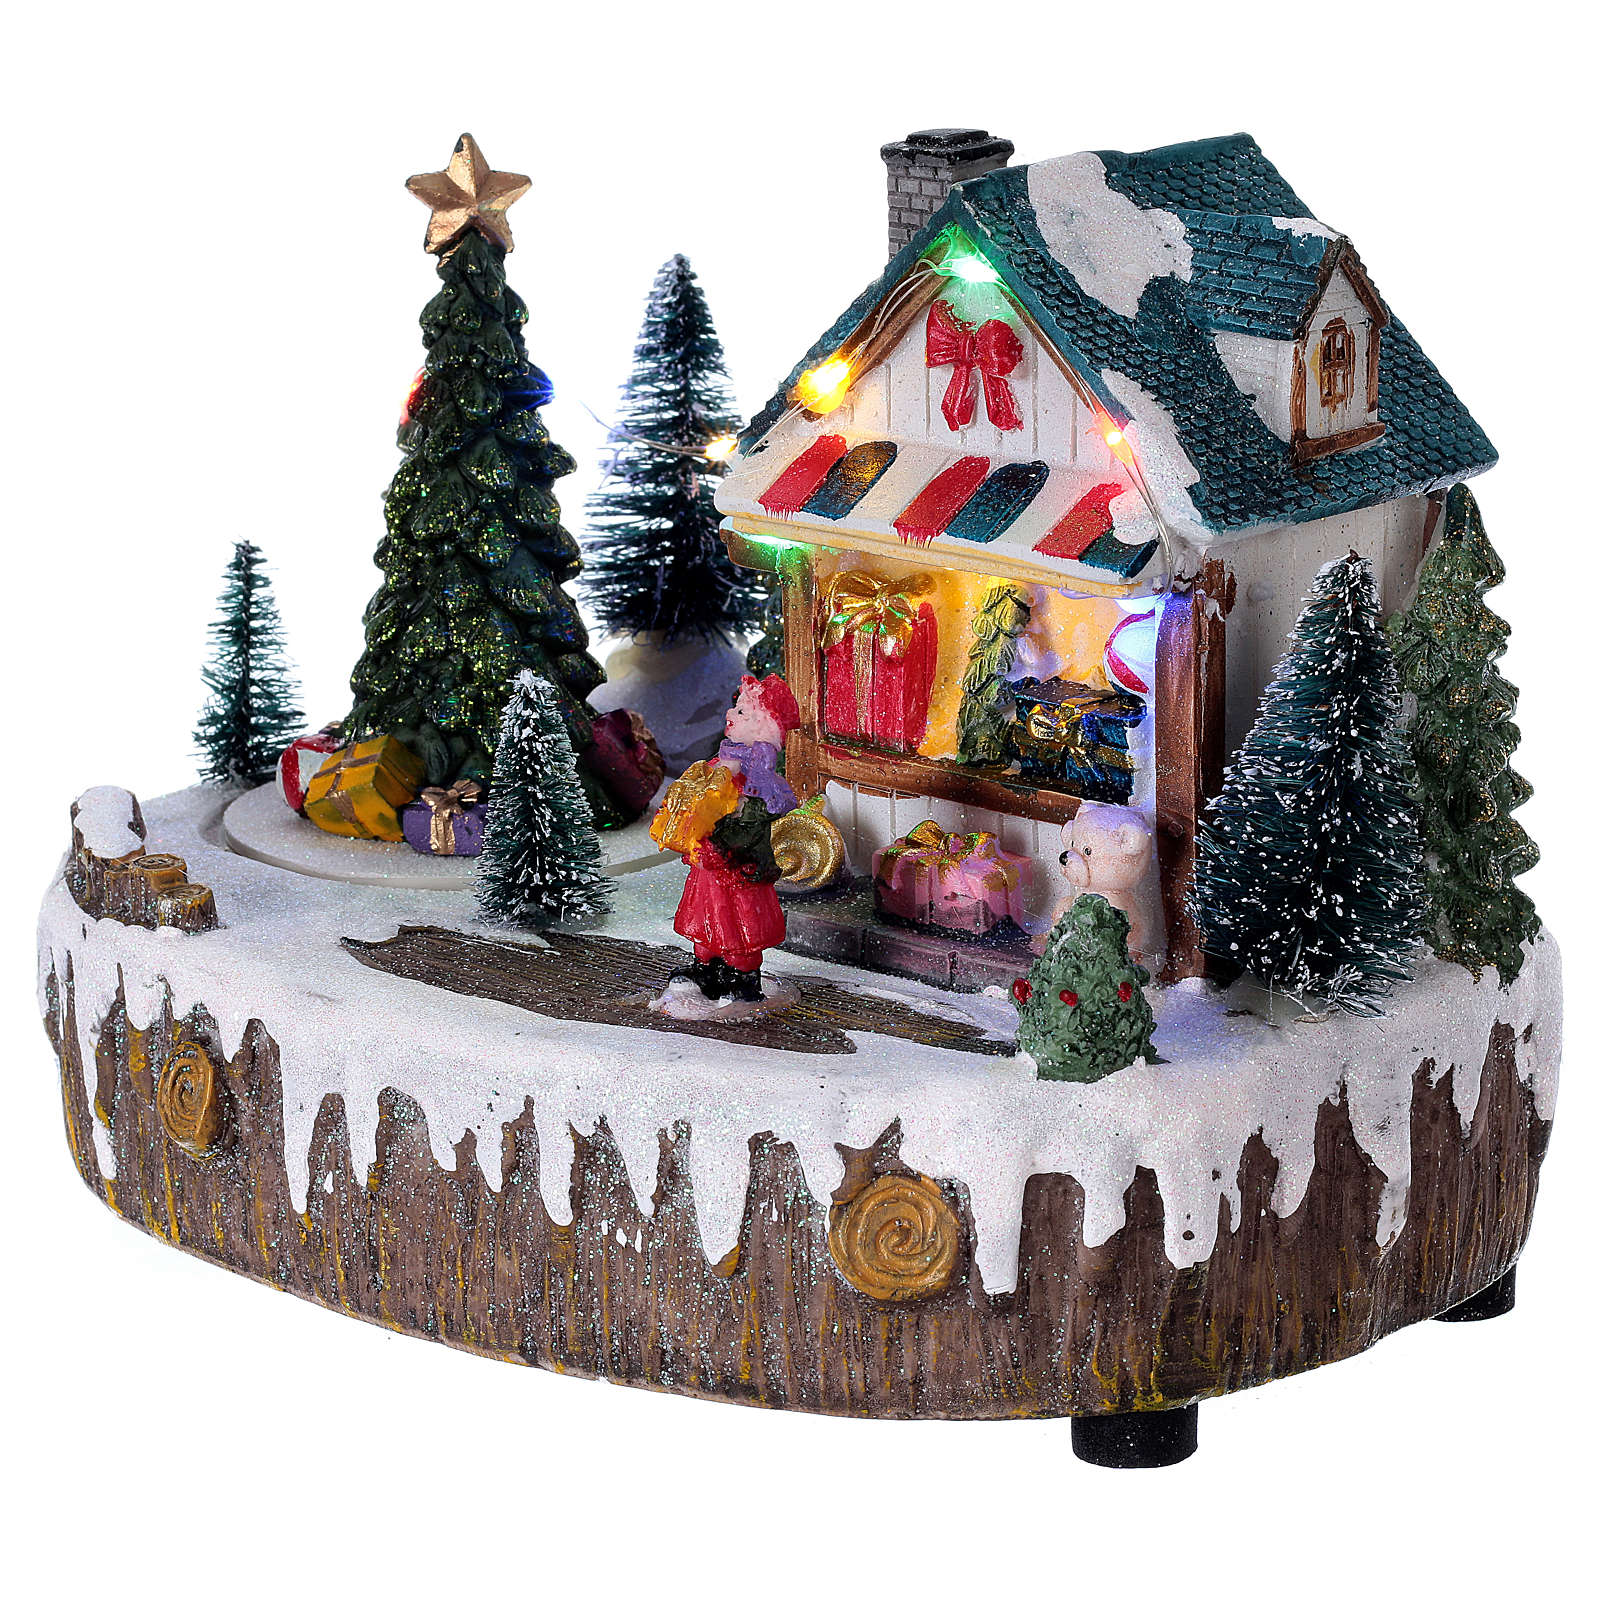 Christmas village set with moving shop lighted tree, | online sales on ...